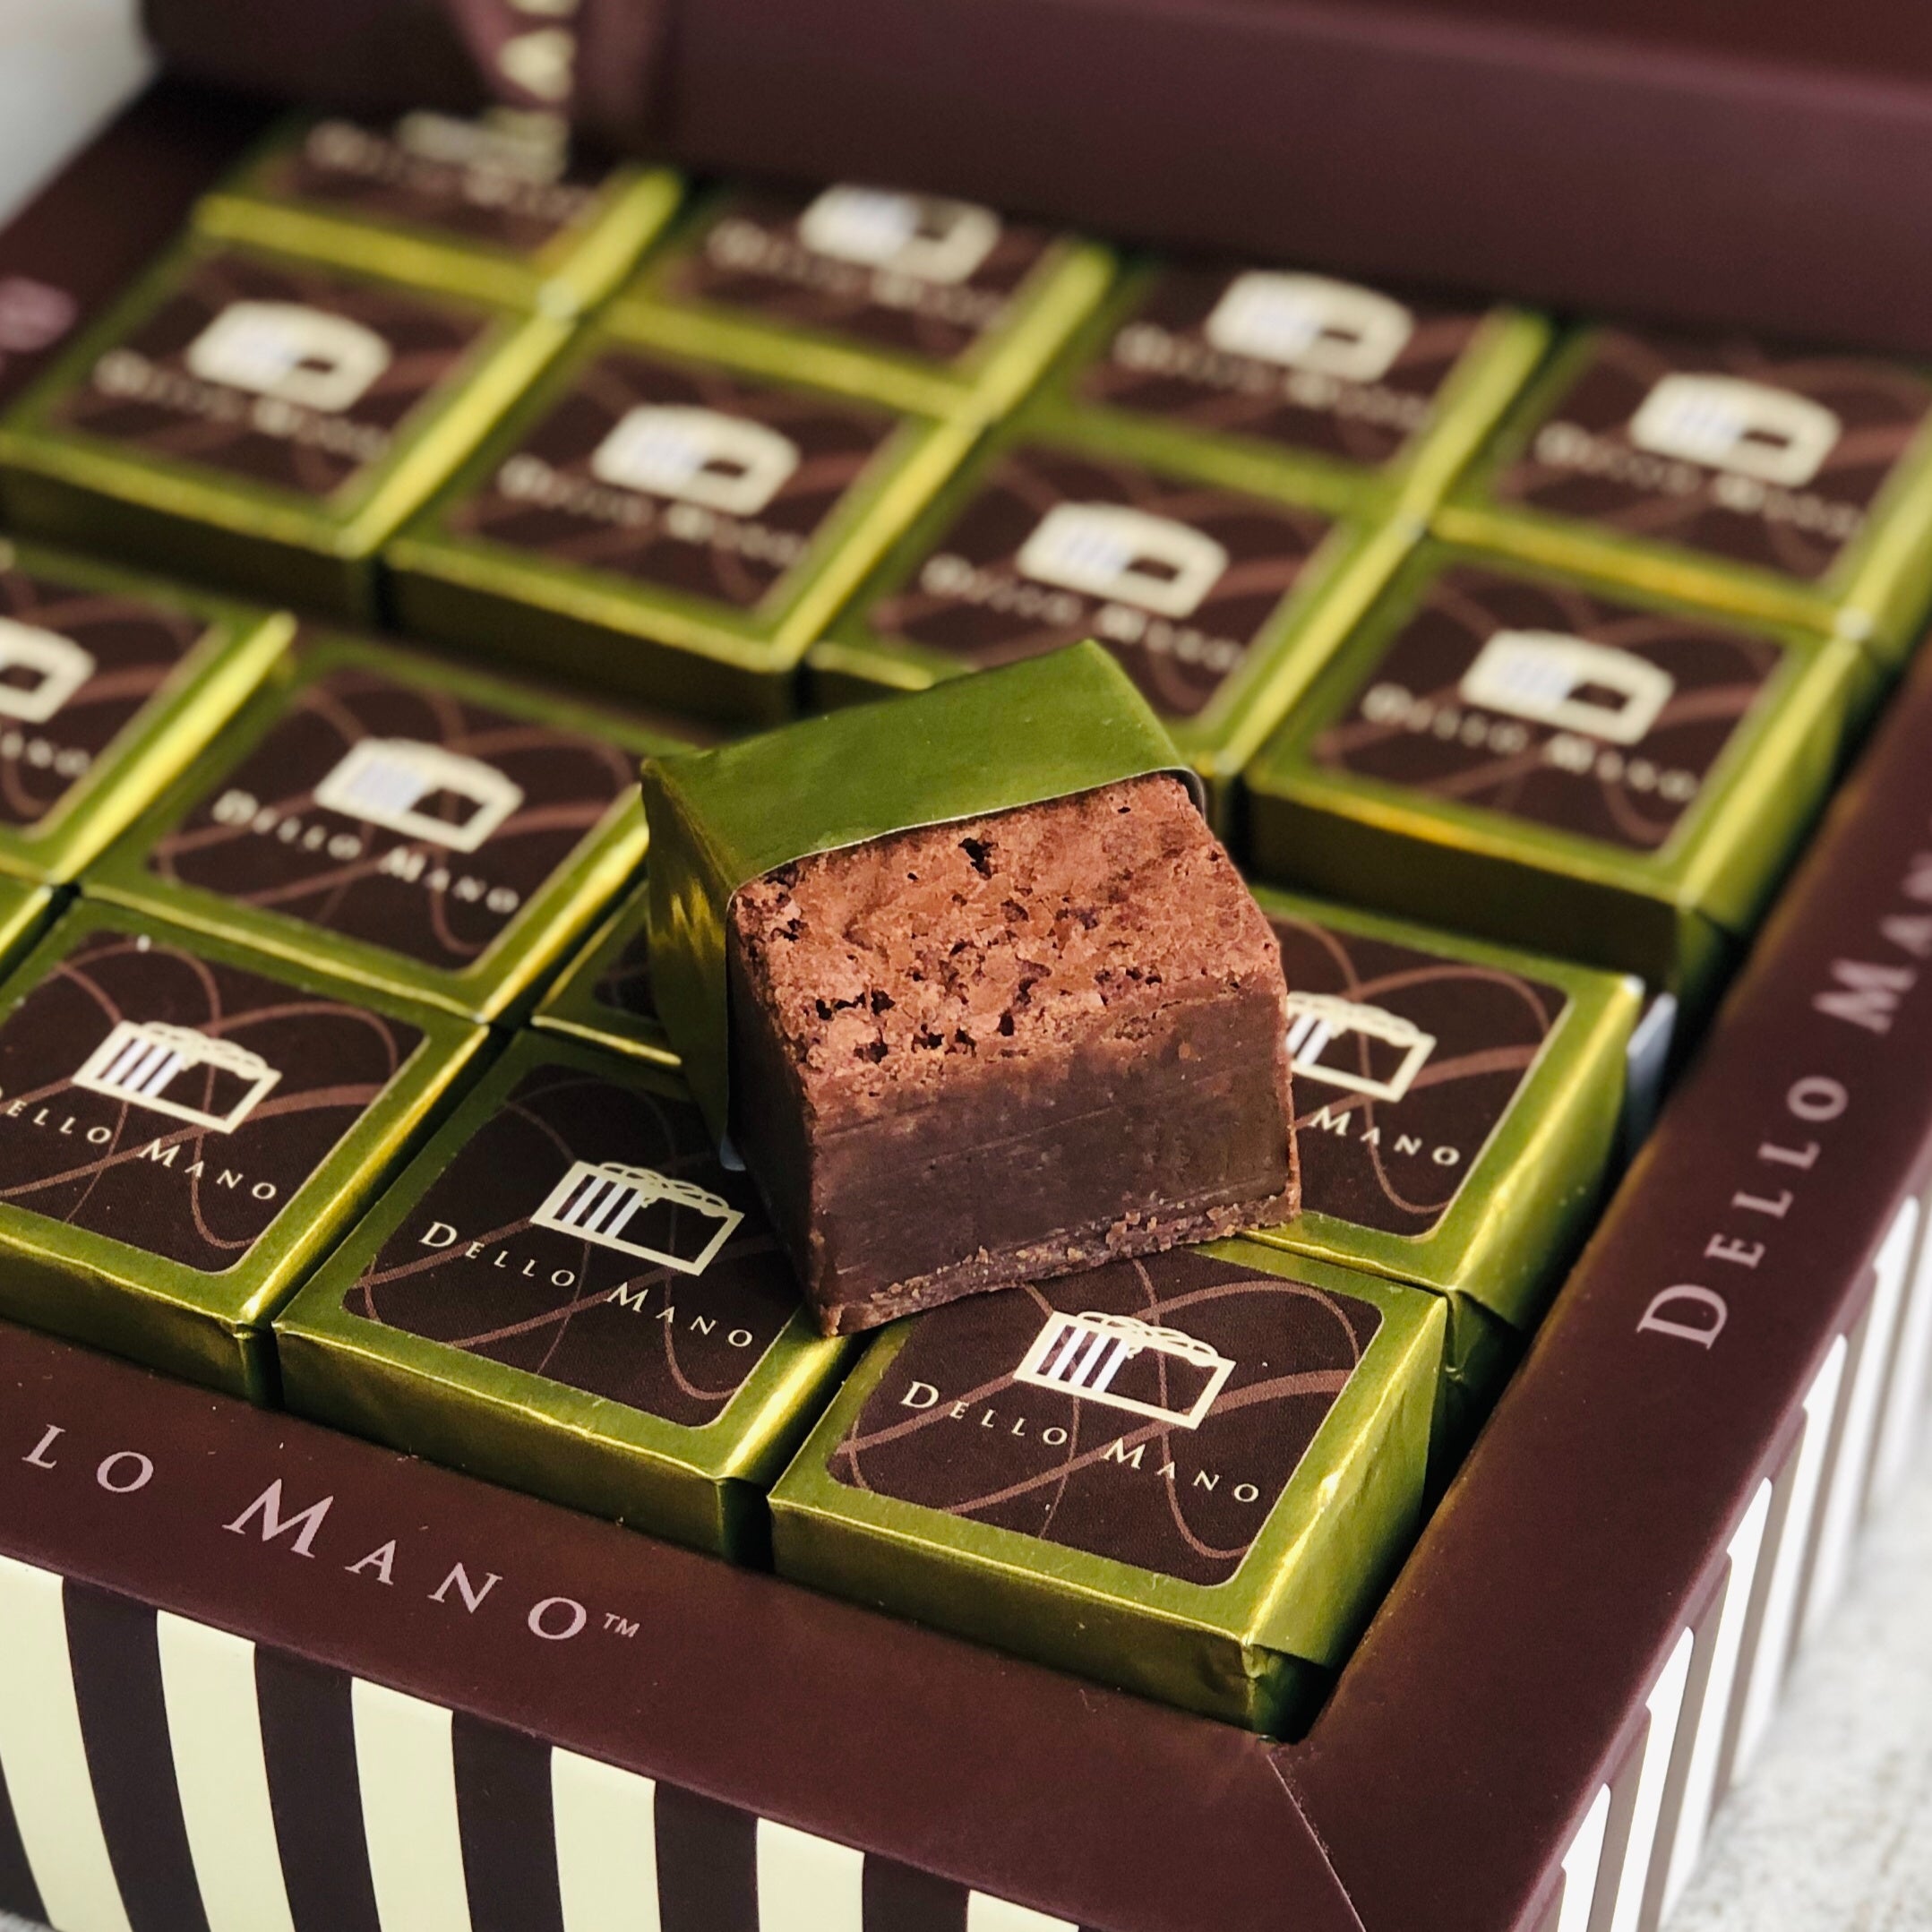 A close up of an open foiled brownie showing a rich chocolate texture brownie with a light fluffy crusty top. The brown chocolate gift box says Dello Mano